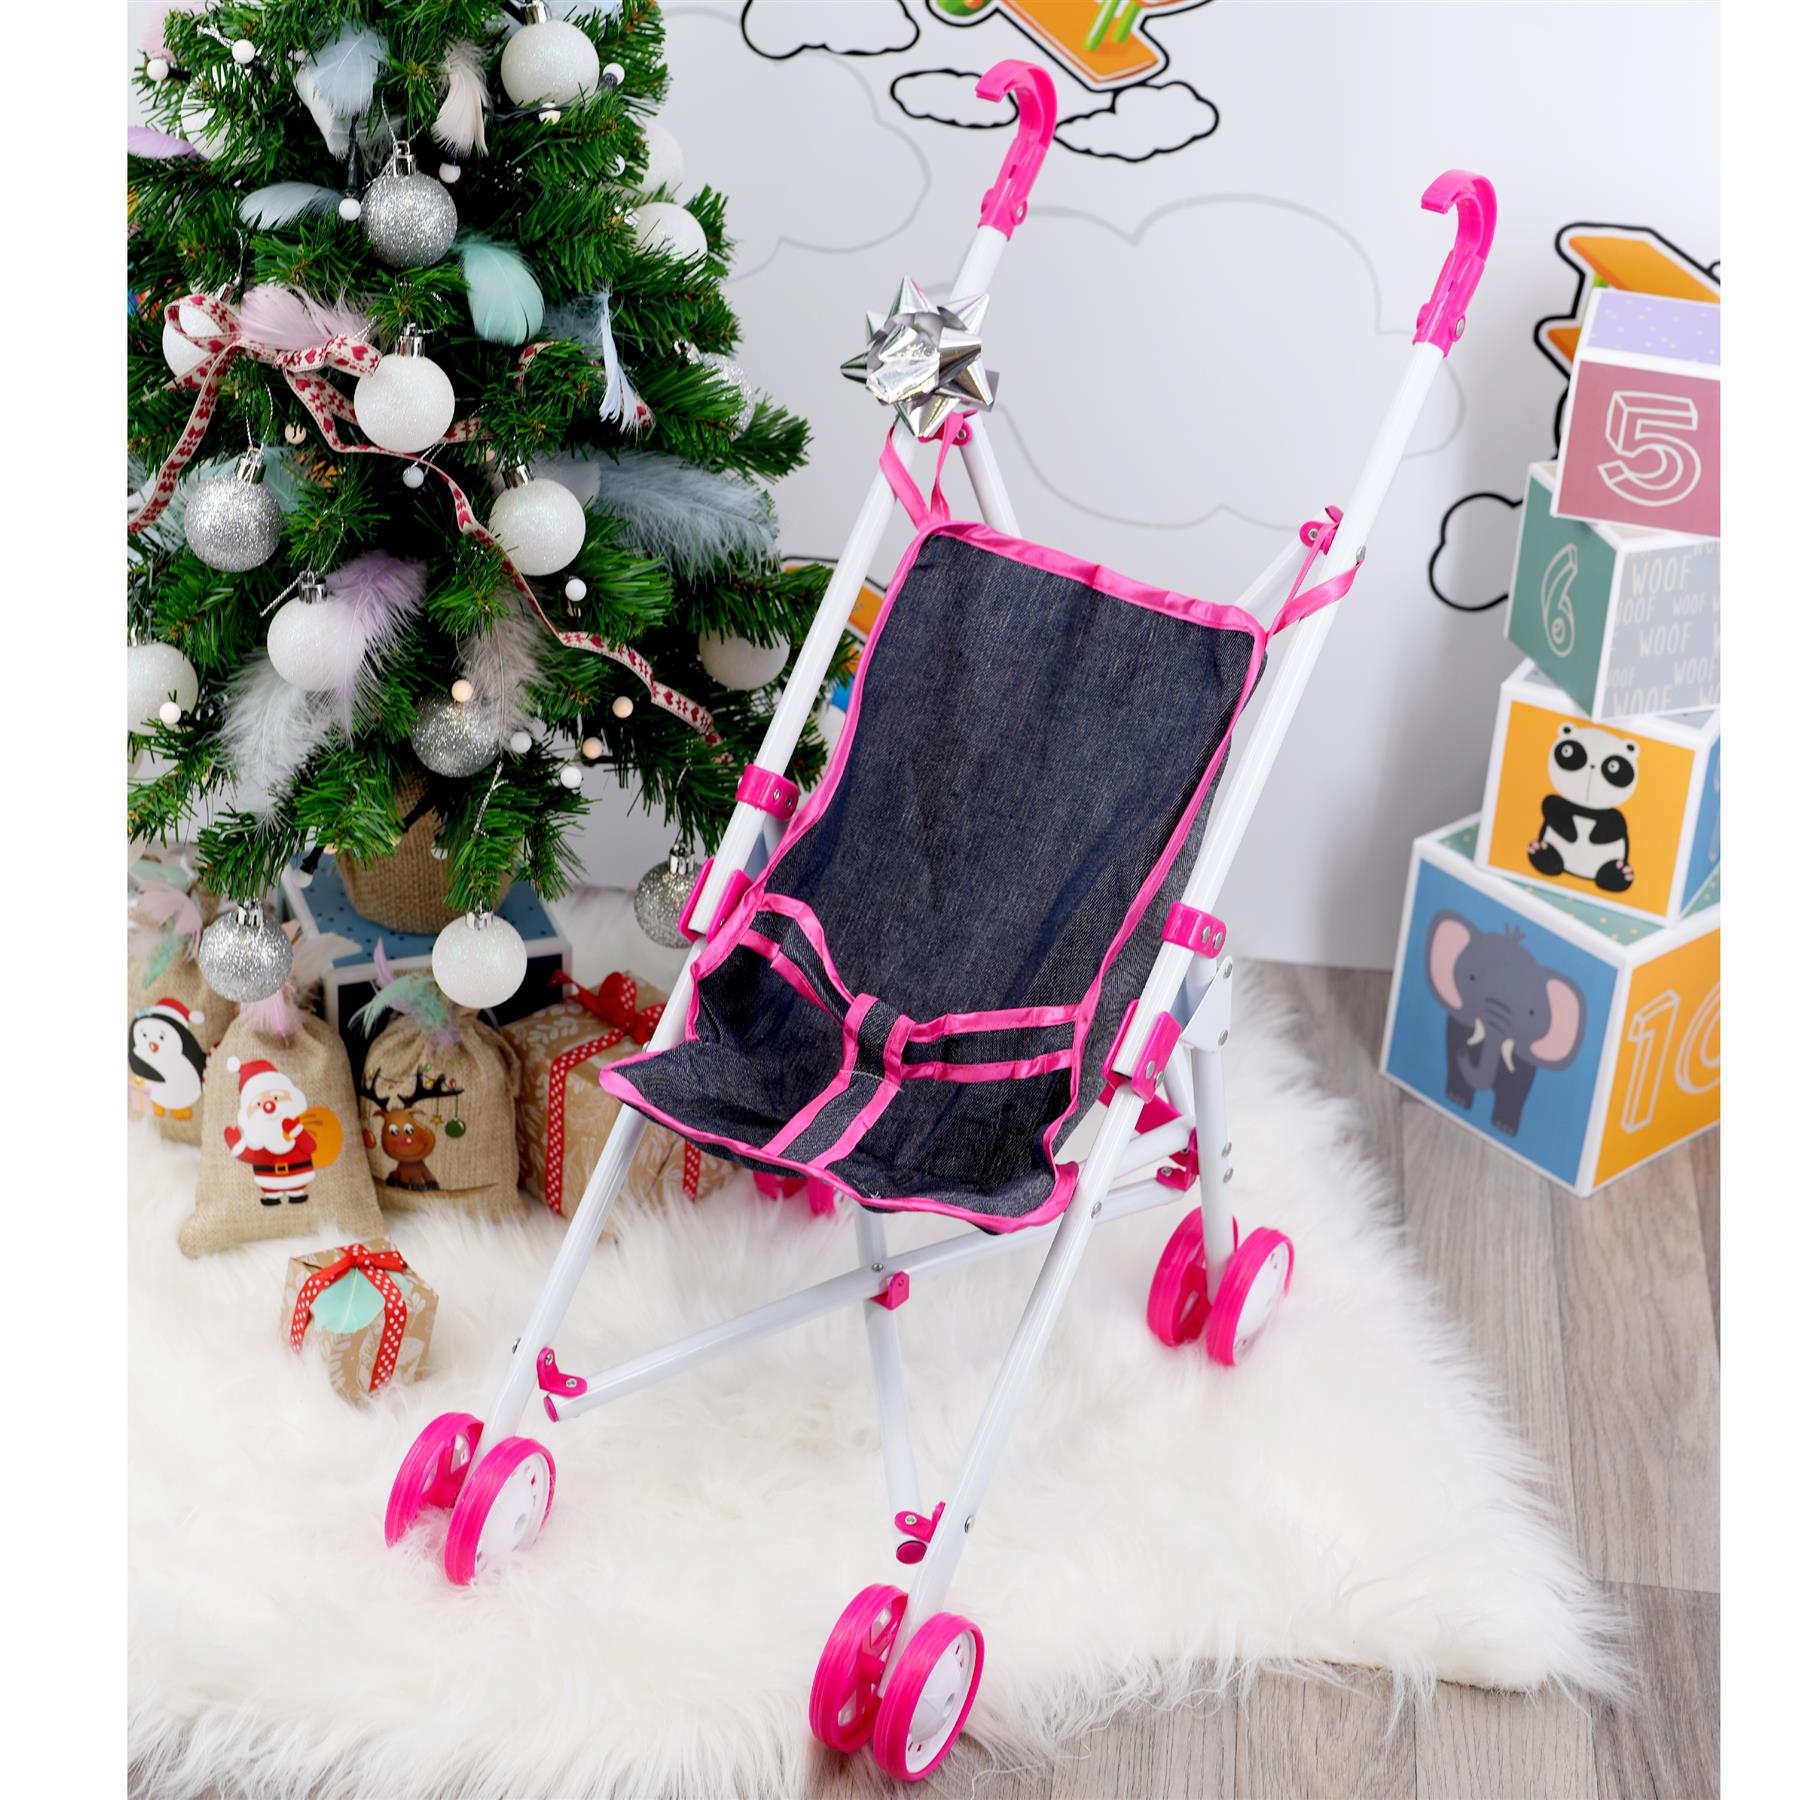 BiBi Doll Toys and Games Pink Baby Doll Foldable Stroller